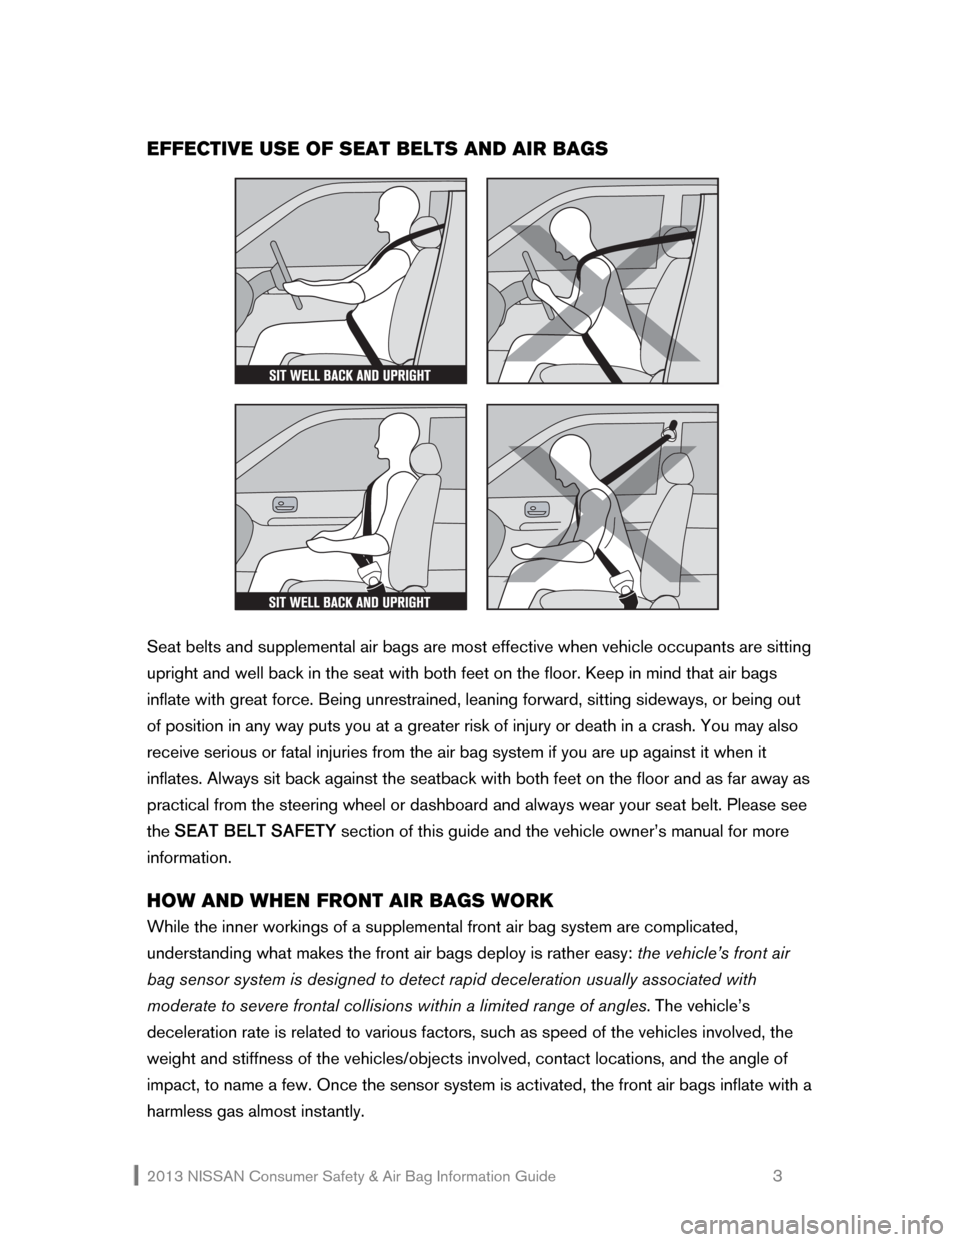 NISSAN QUEST 2013 RE52 / 4.G Consumer Safety Air Bag Information Guide 2013 NISSAN Consumer Safety & Air Bag Information Guide                                                   3 
EFFECTIVE USE OF SEAT BELTS AND AIR BAGS 
 
 
 
Seat belts and supplemental air bags are mo